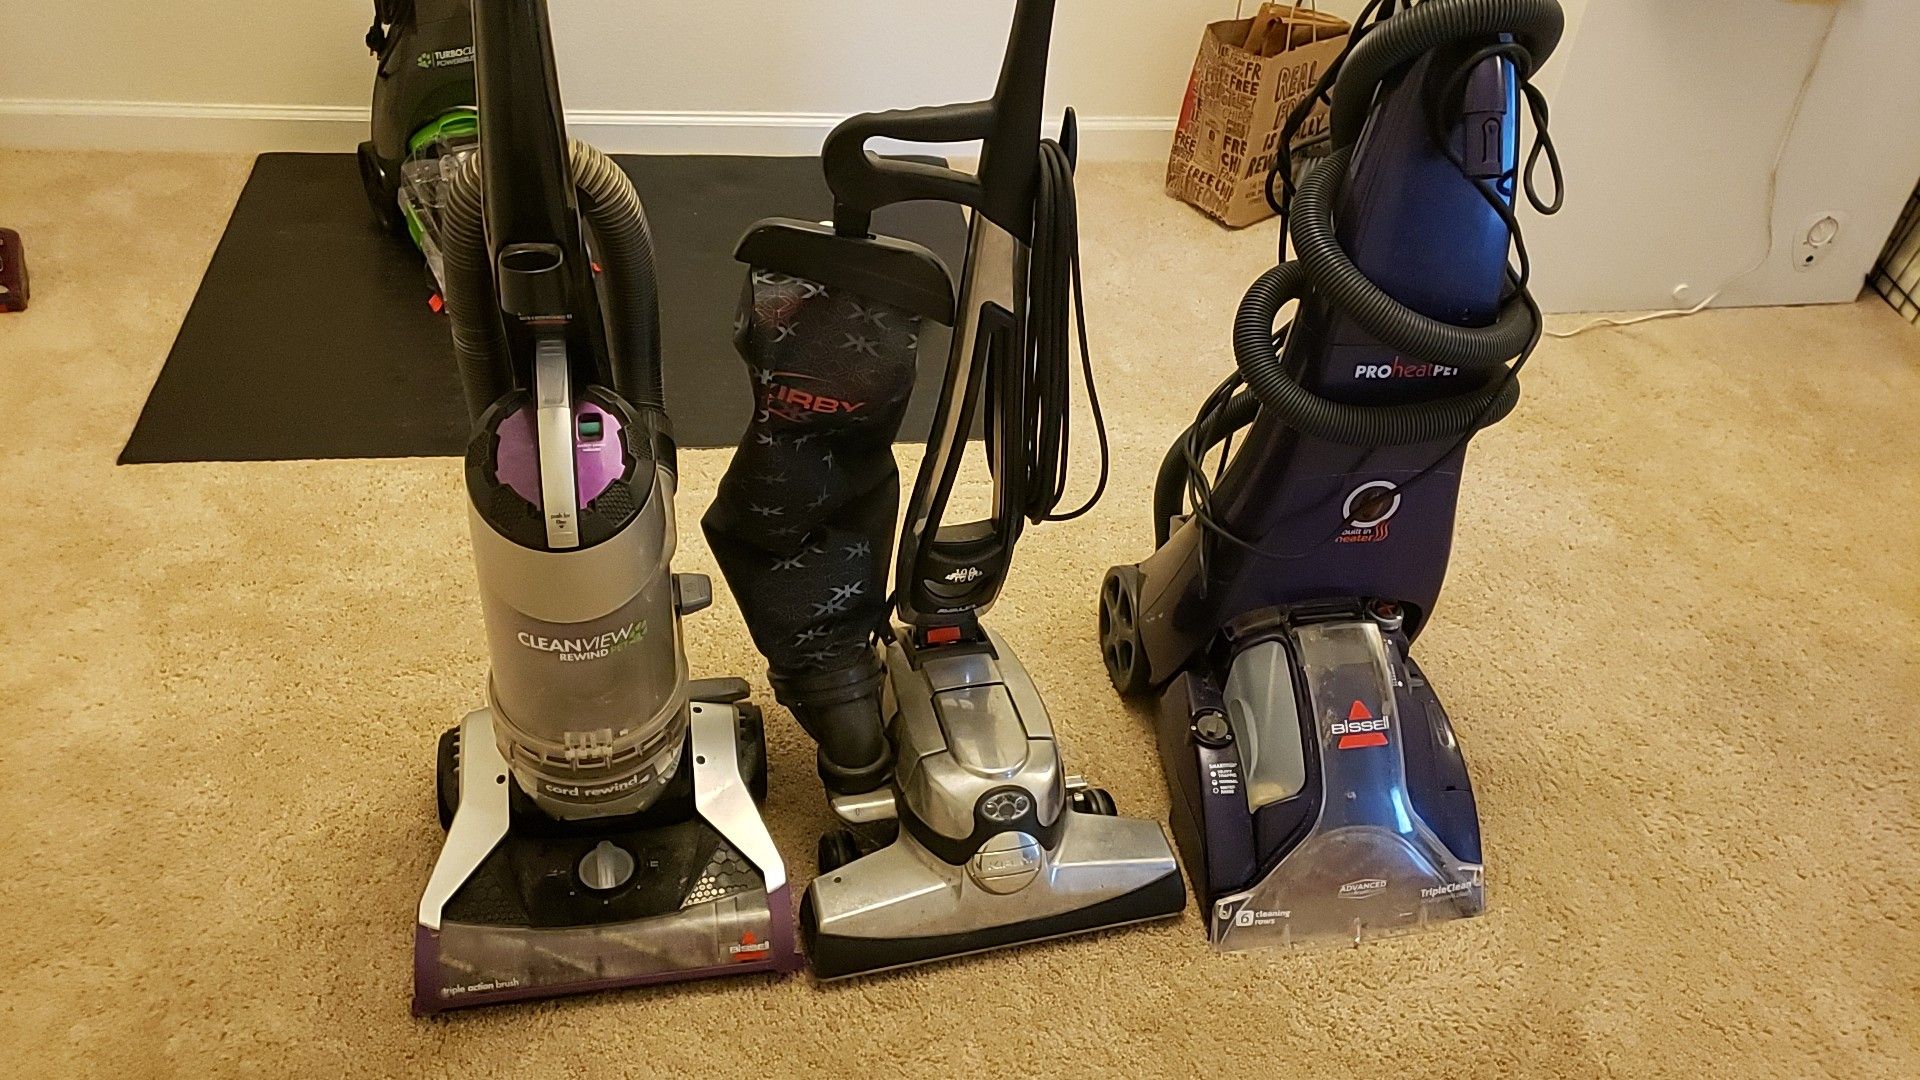 2 vacuum cleaners and 1 steam cleaner